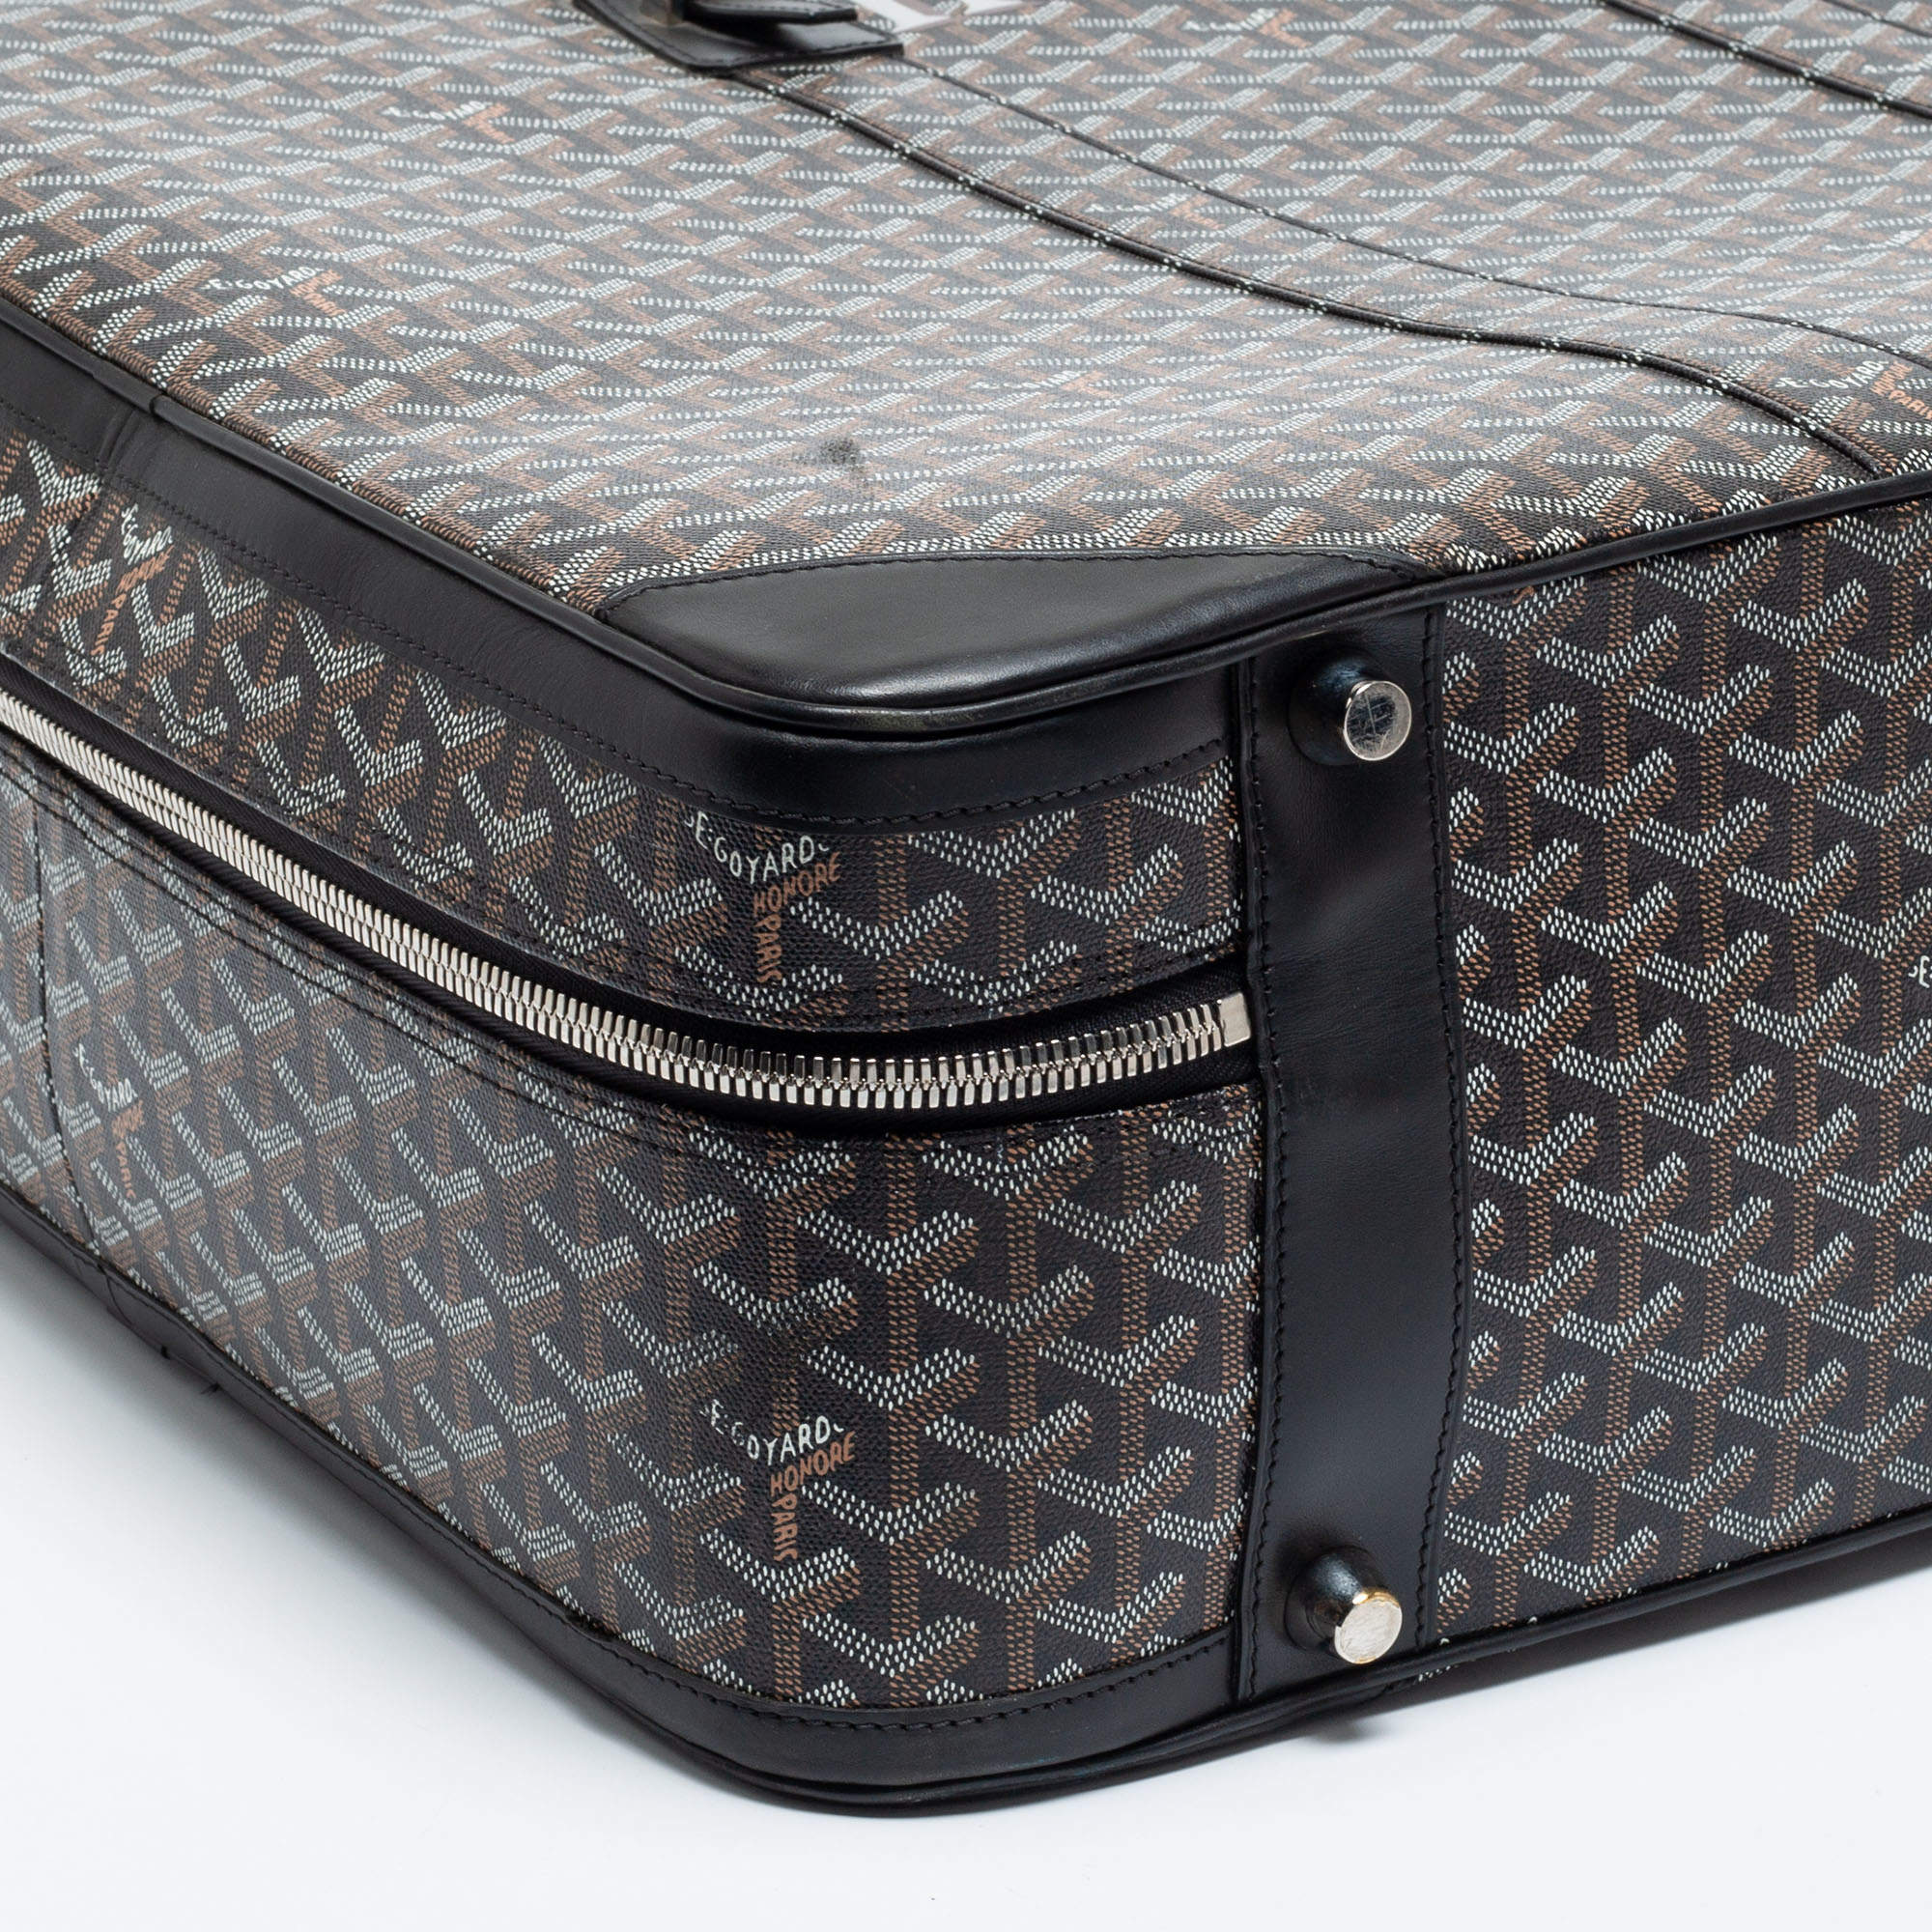 Easy to clean Goyard Black Coated Canvas And Leather Caravelle 60 Suitcase  For Men, in sale Goyard Sales Shop